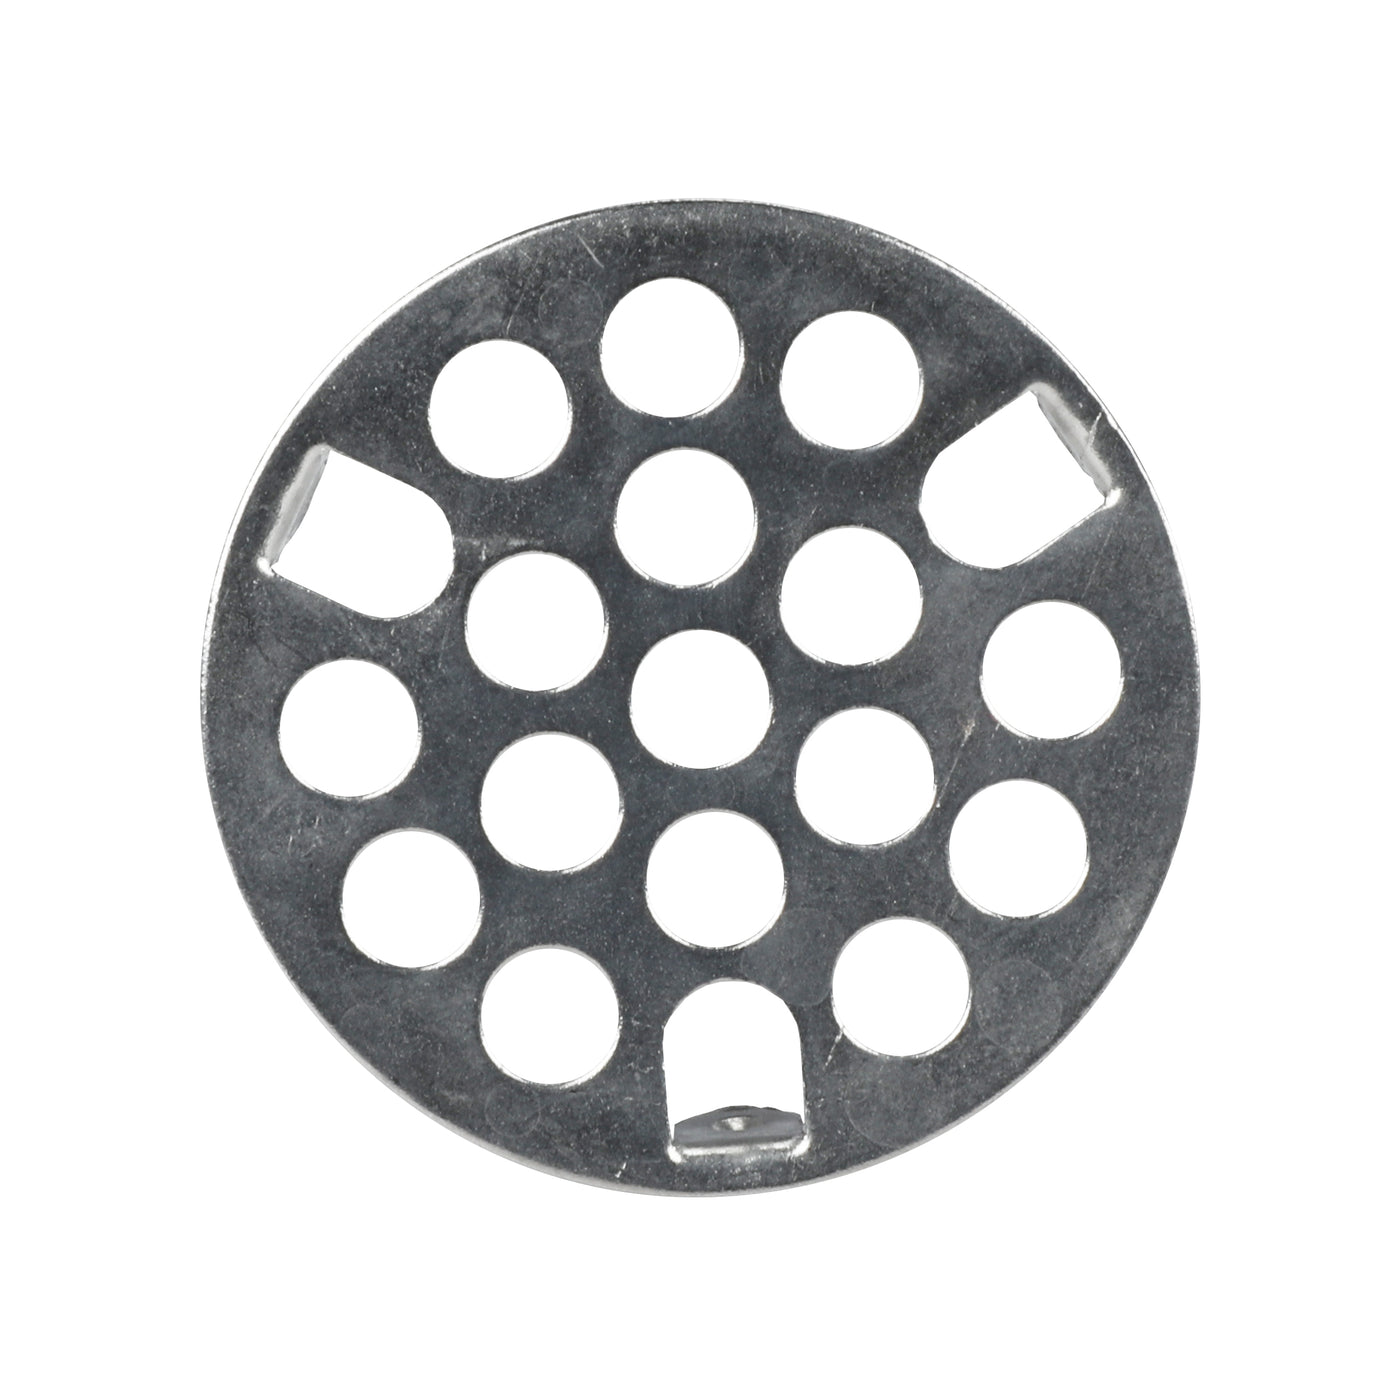 Danco 2-7/8 Bath Grid Strainer with Screw-In